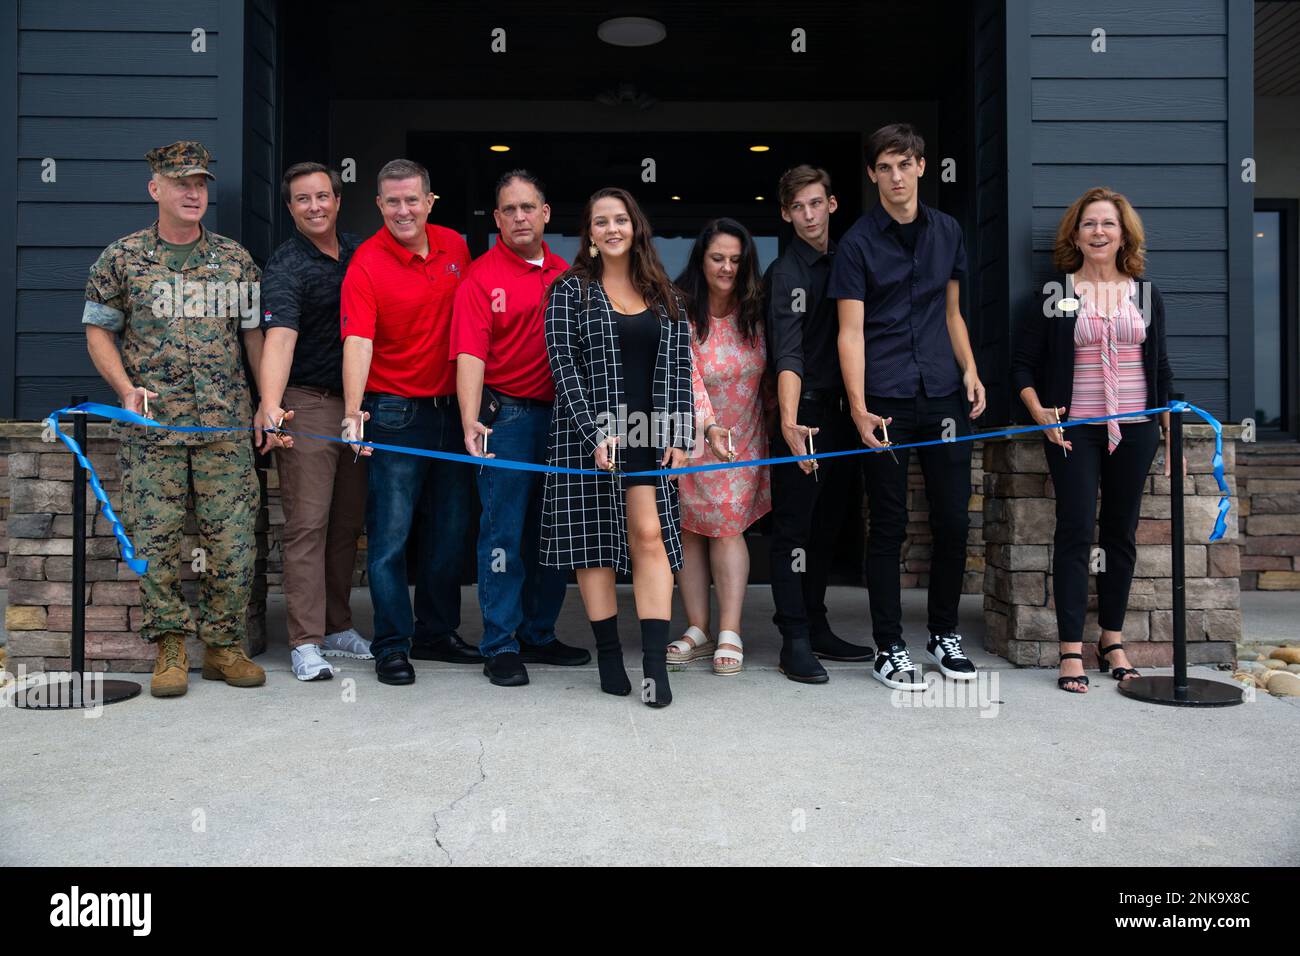 Family members of Gunnery Sgt. Terry Ball and distinguished guests prepare to cut a ribbon during a ceremony in his honor on Marine Corps Base (MCB) Camp Lejeune, North Carolina, Aug. 4, 2022. The former staff noncommissioned officer’s club, dedicated to Ball, was destroyed during Hurricane Florence in 2018 and as a result, Balls memorial was moved to a new location. At a later date, the restaurant and sports bar will be dedicated to Ball for his service to the Marine Corps where he sustained fatal wounds while assigned to India Company, 3rd Battalion, 8th Marine Regiment, 2nd Marine Division, Stock Photo